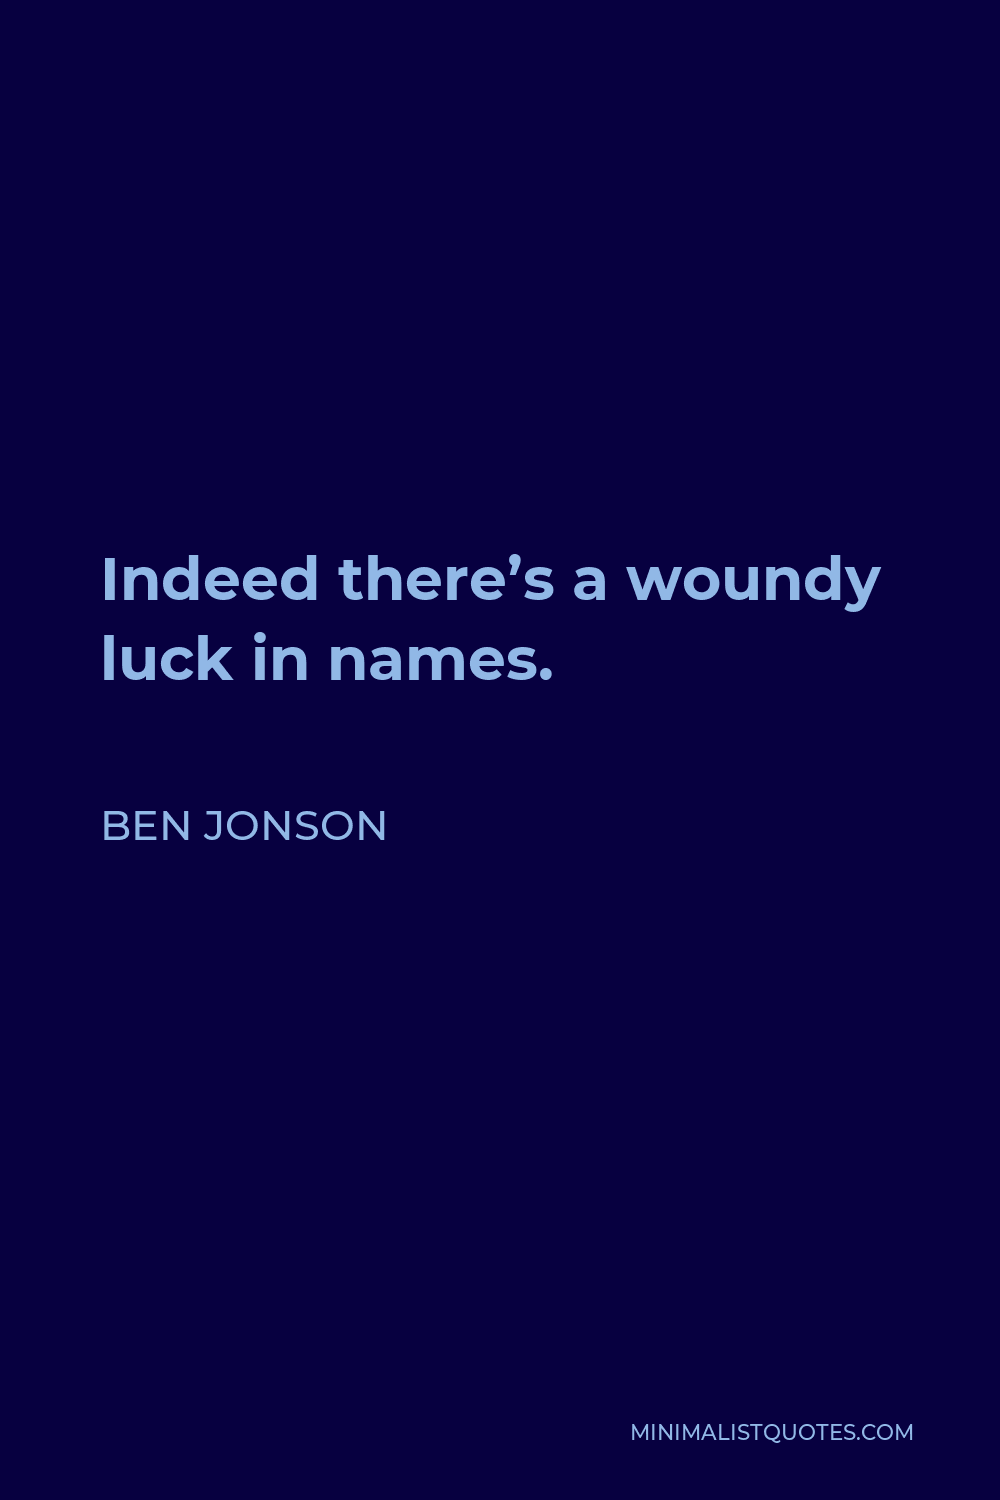 Ben Jonson Quote - Indeed there’s a woundy luck in names.